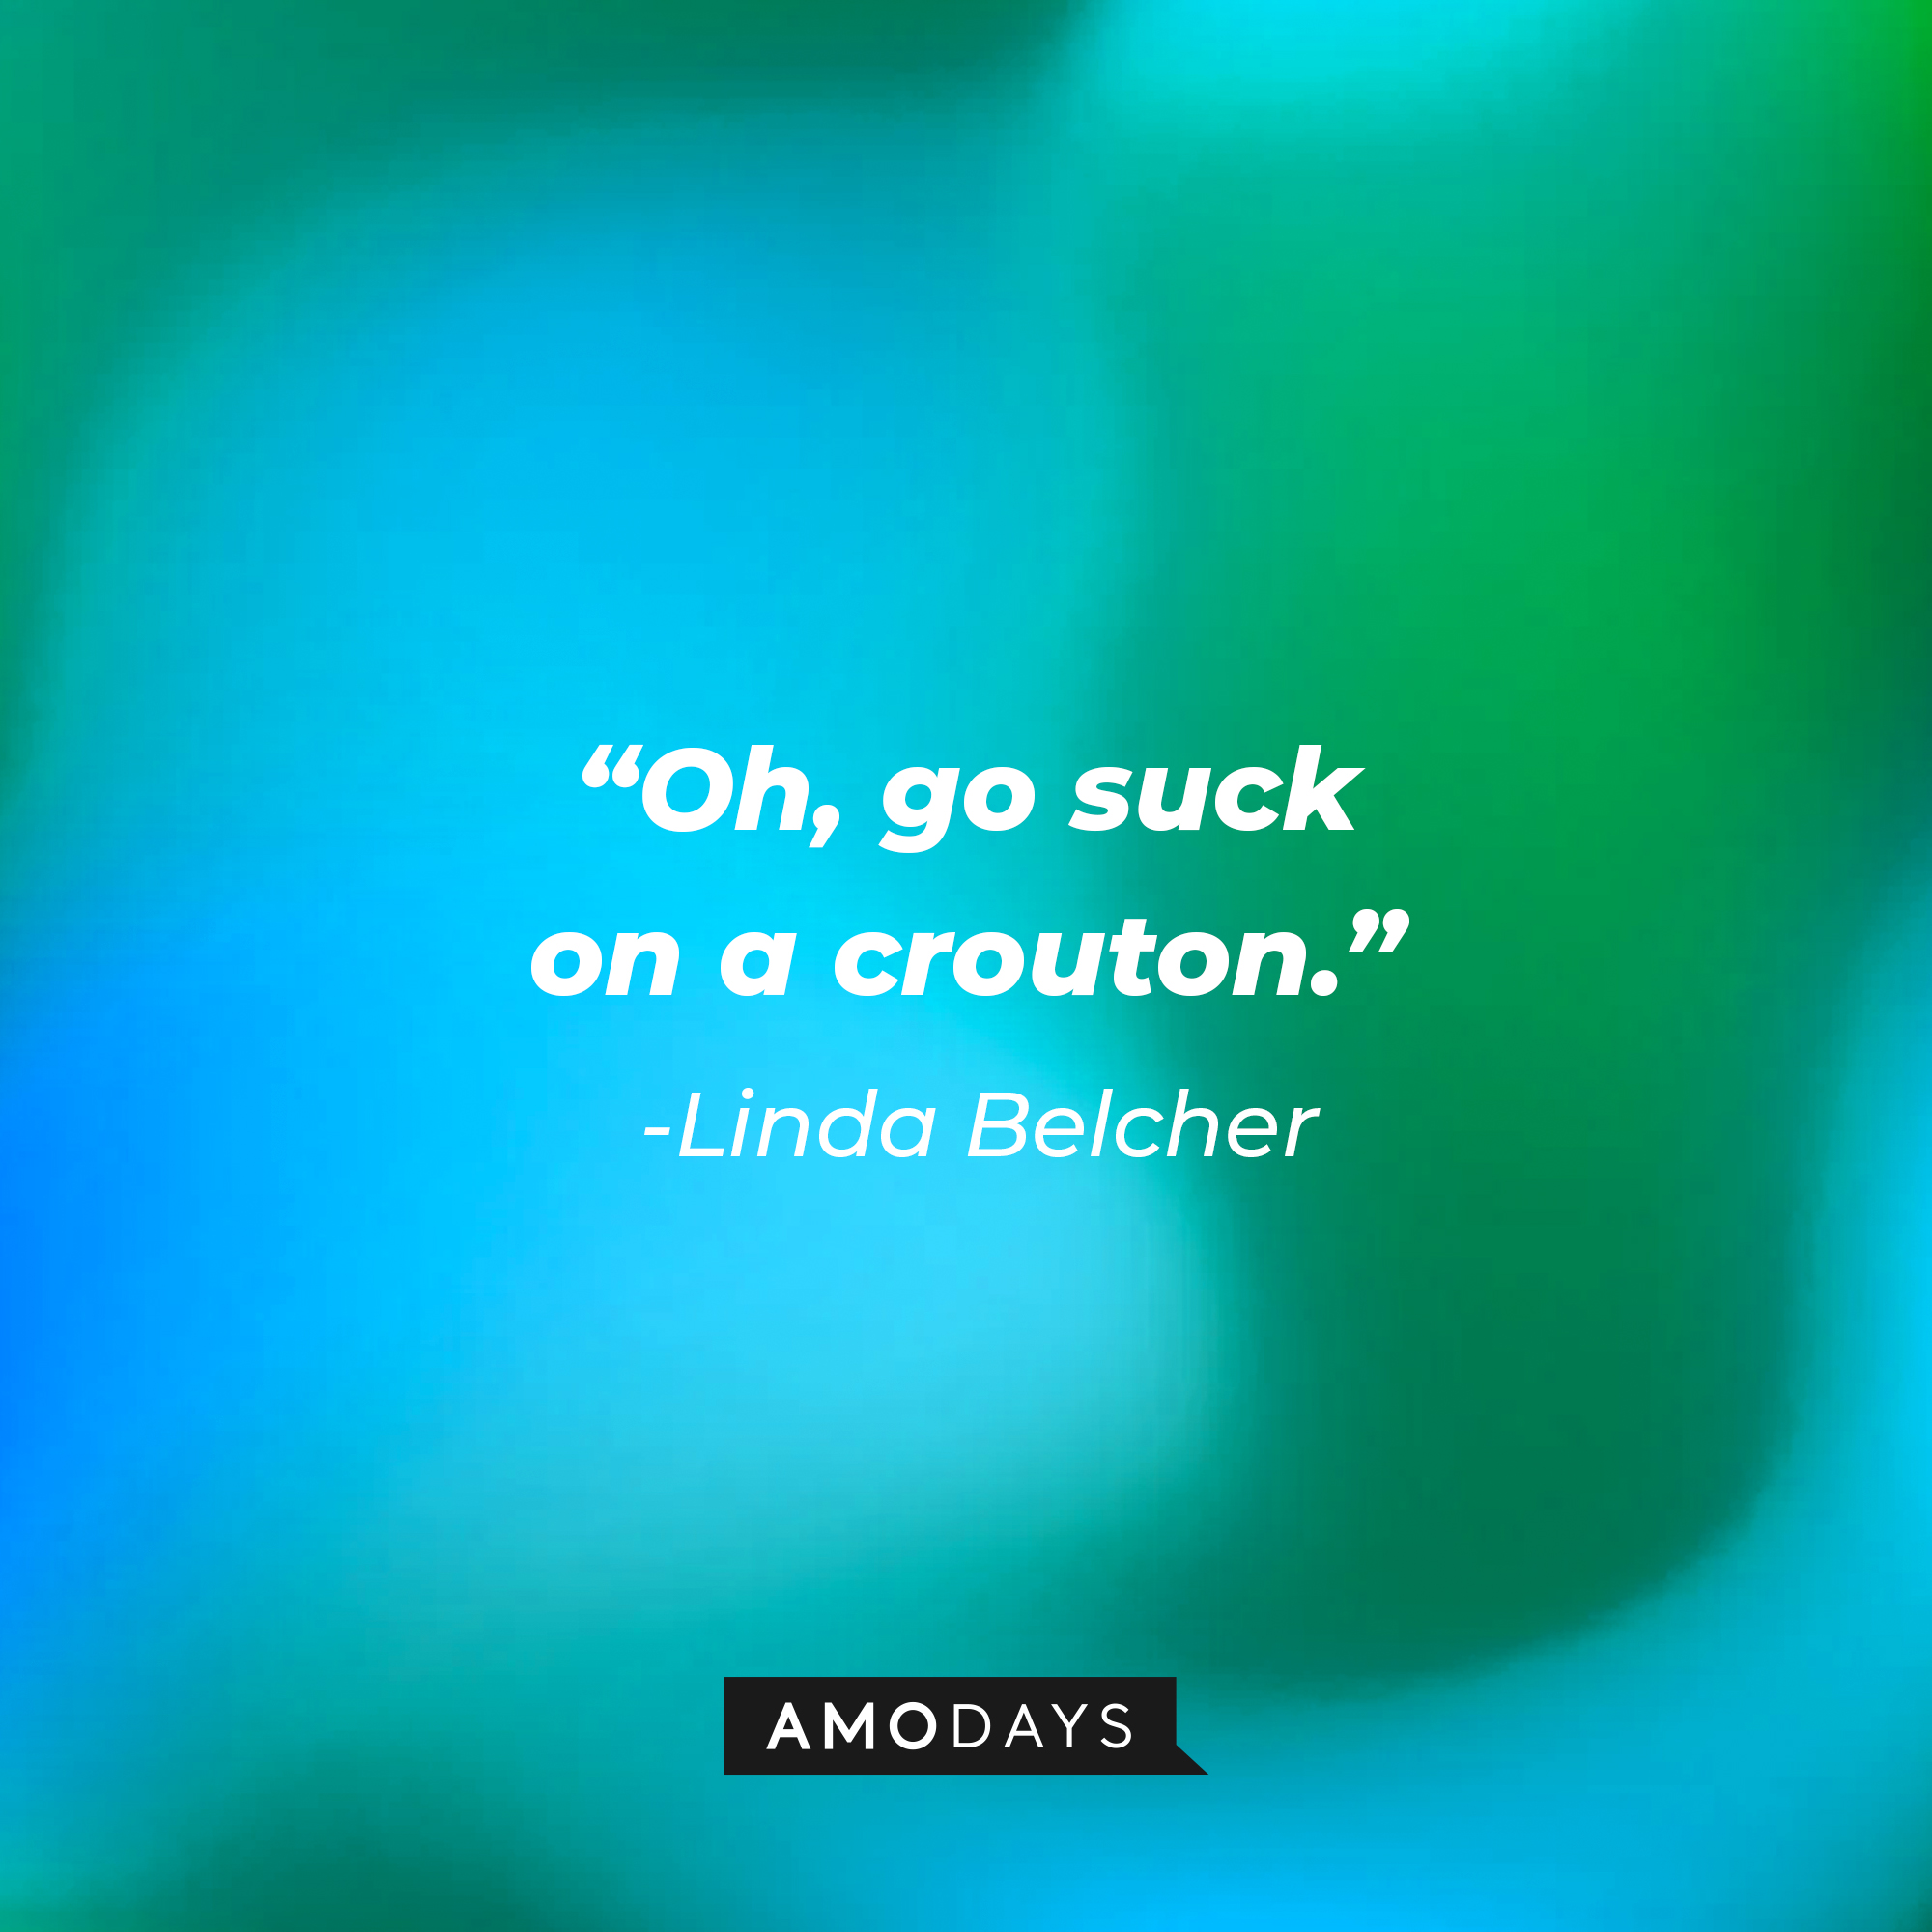 Linda Belcher’s quote: “Oh, go suck on a crouton.”   | Source: AmoDays